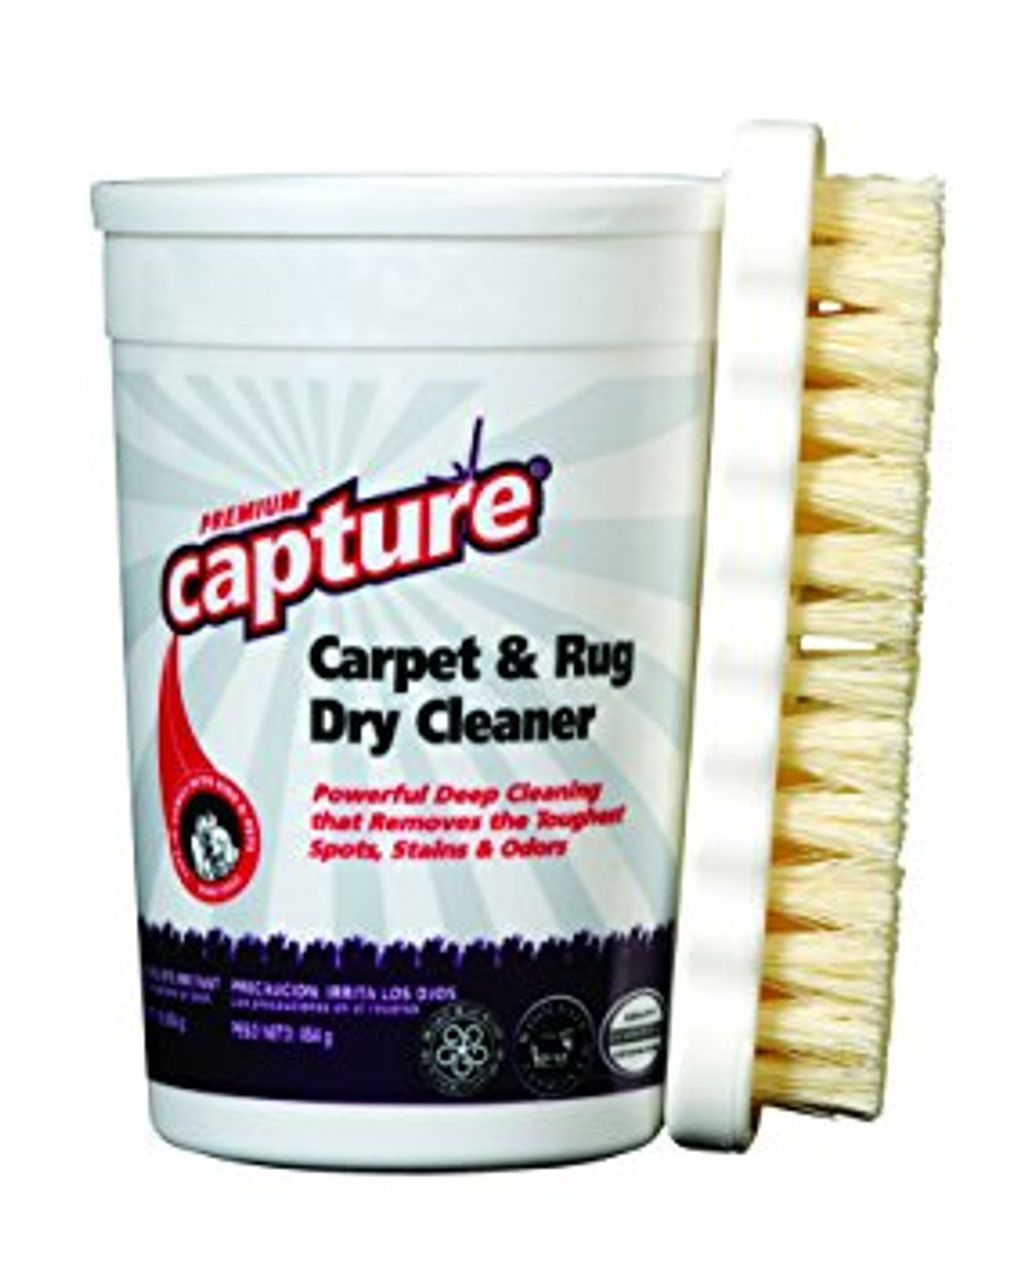 Six Brands of Dry Carpet Cleaning Powder Recalled by Milliken Due to Risk  of Exposure to Bacteria